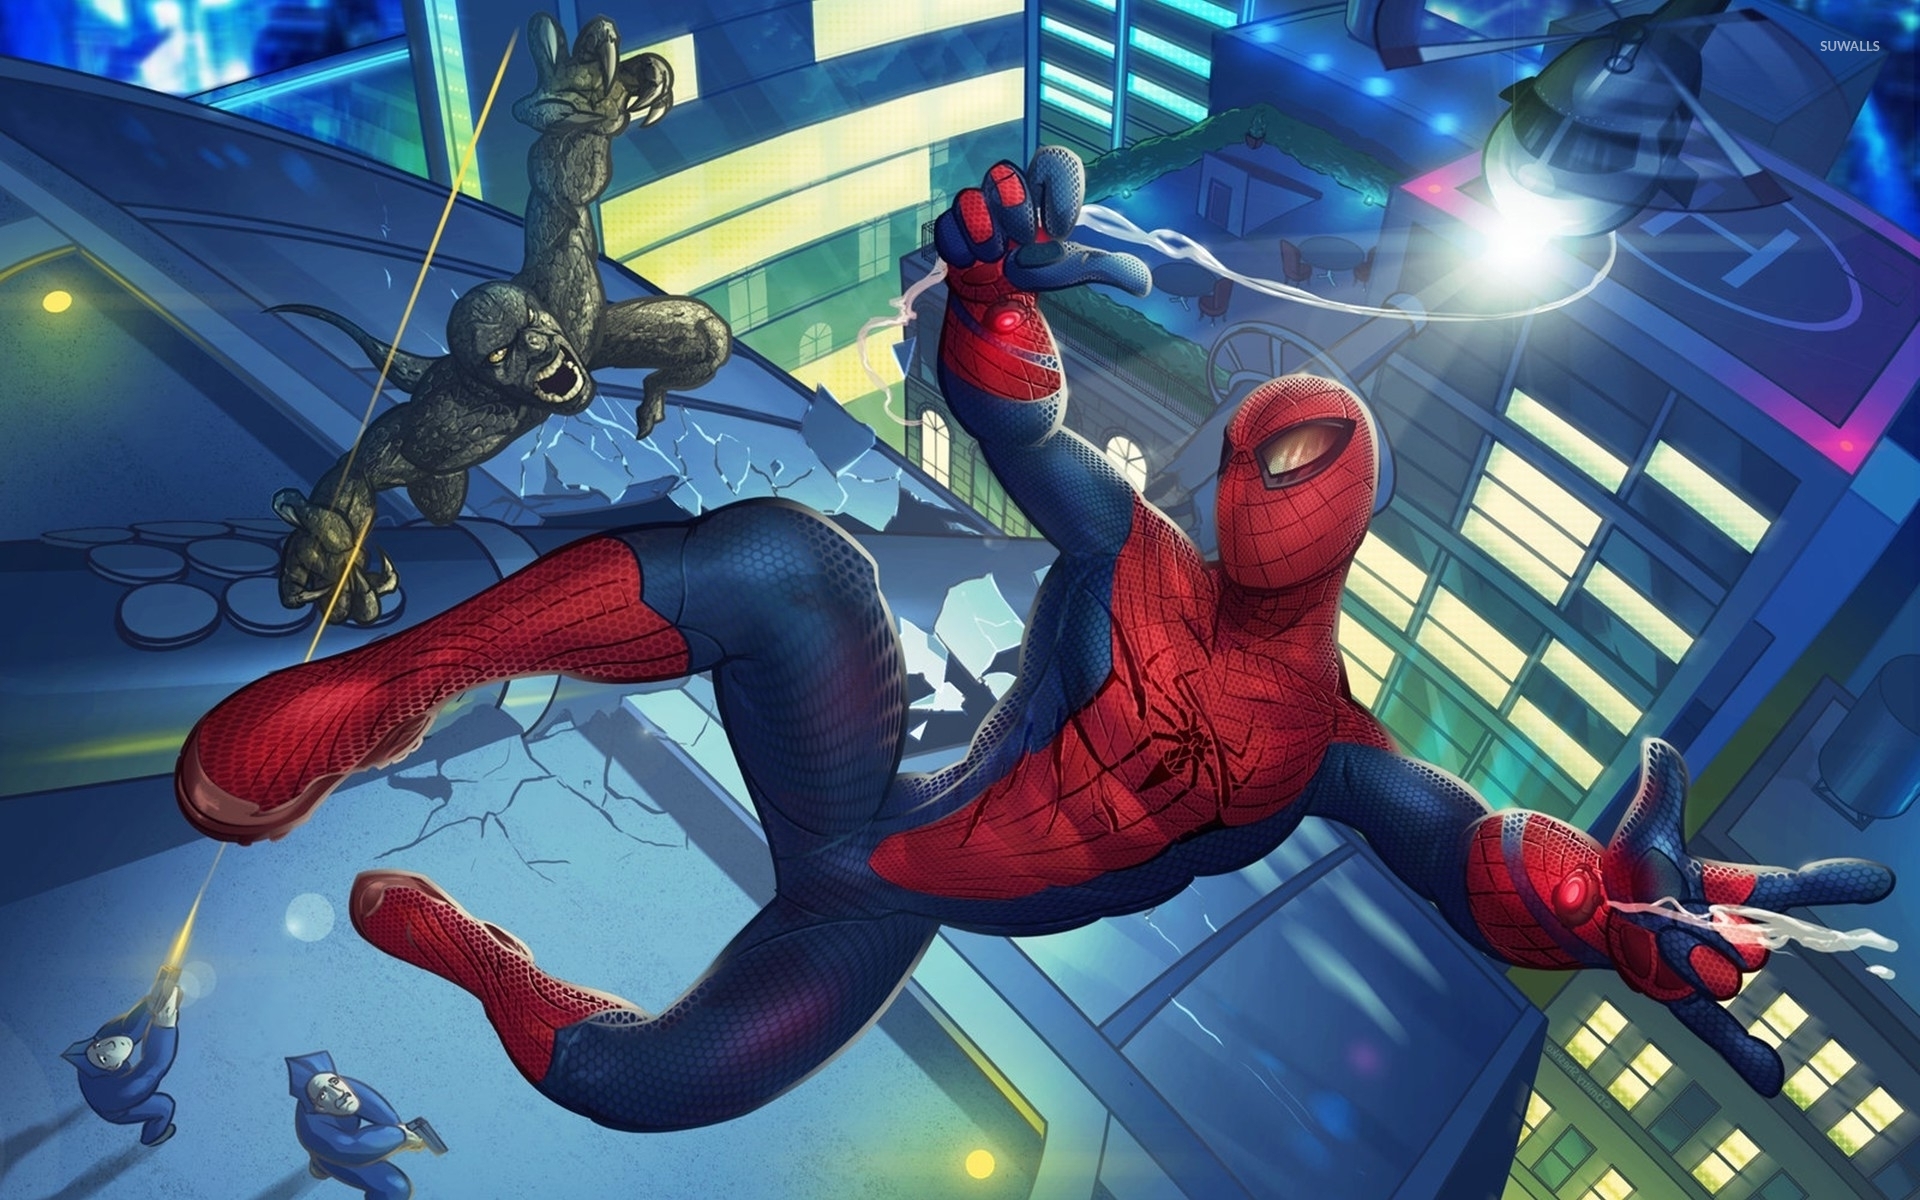 Spider-Man fighting with a monster wallpaper - Comic wallpapers - #52513